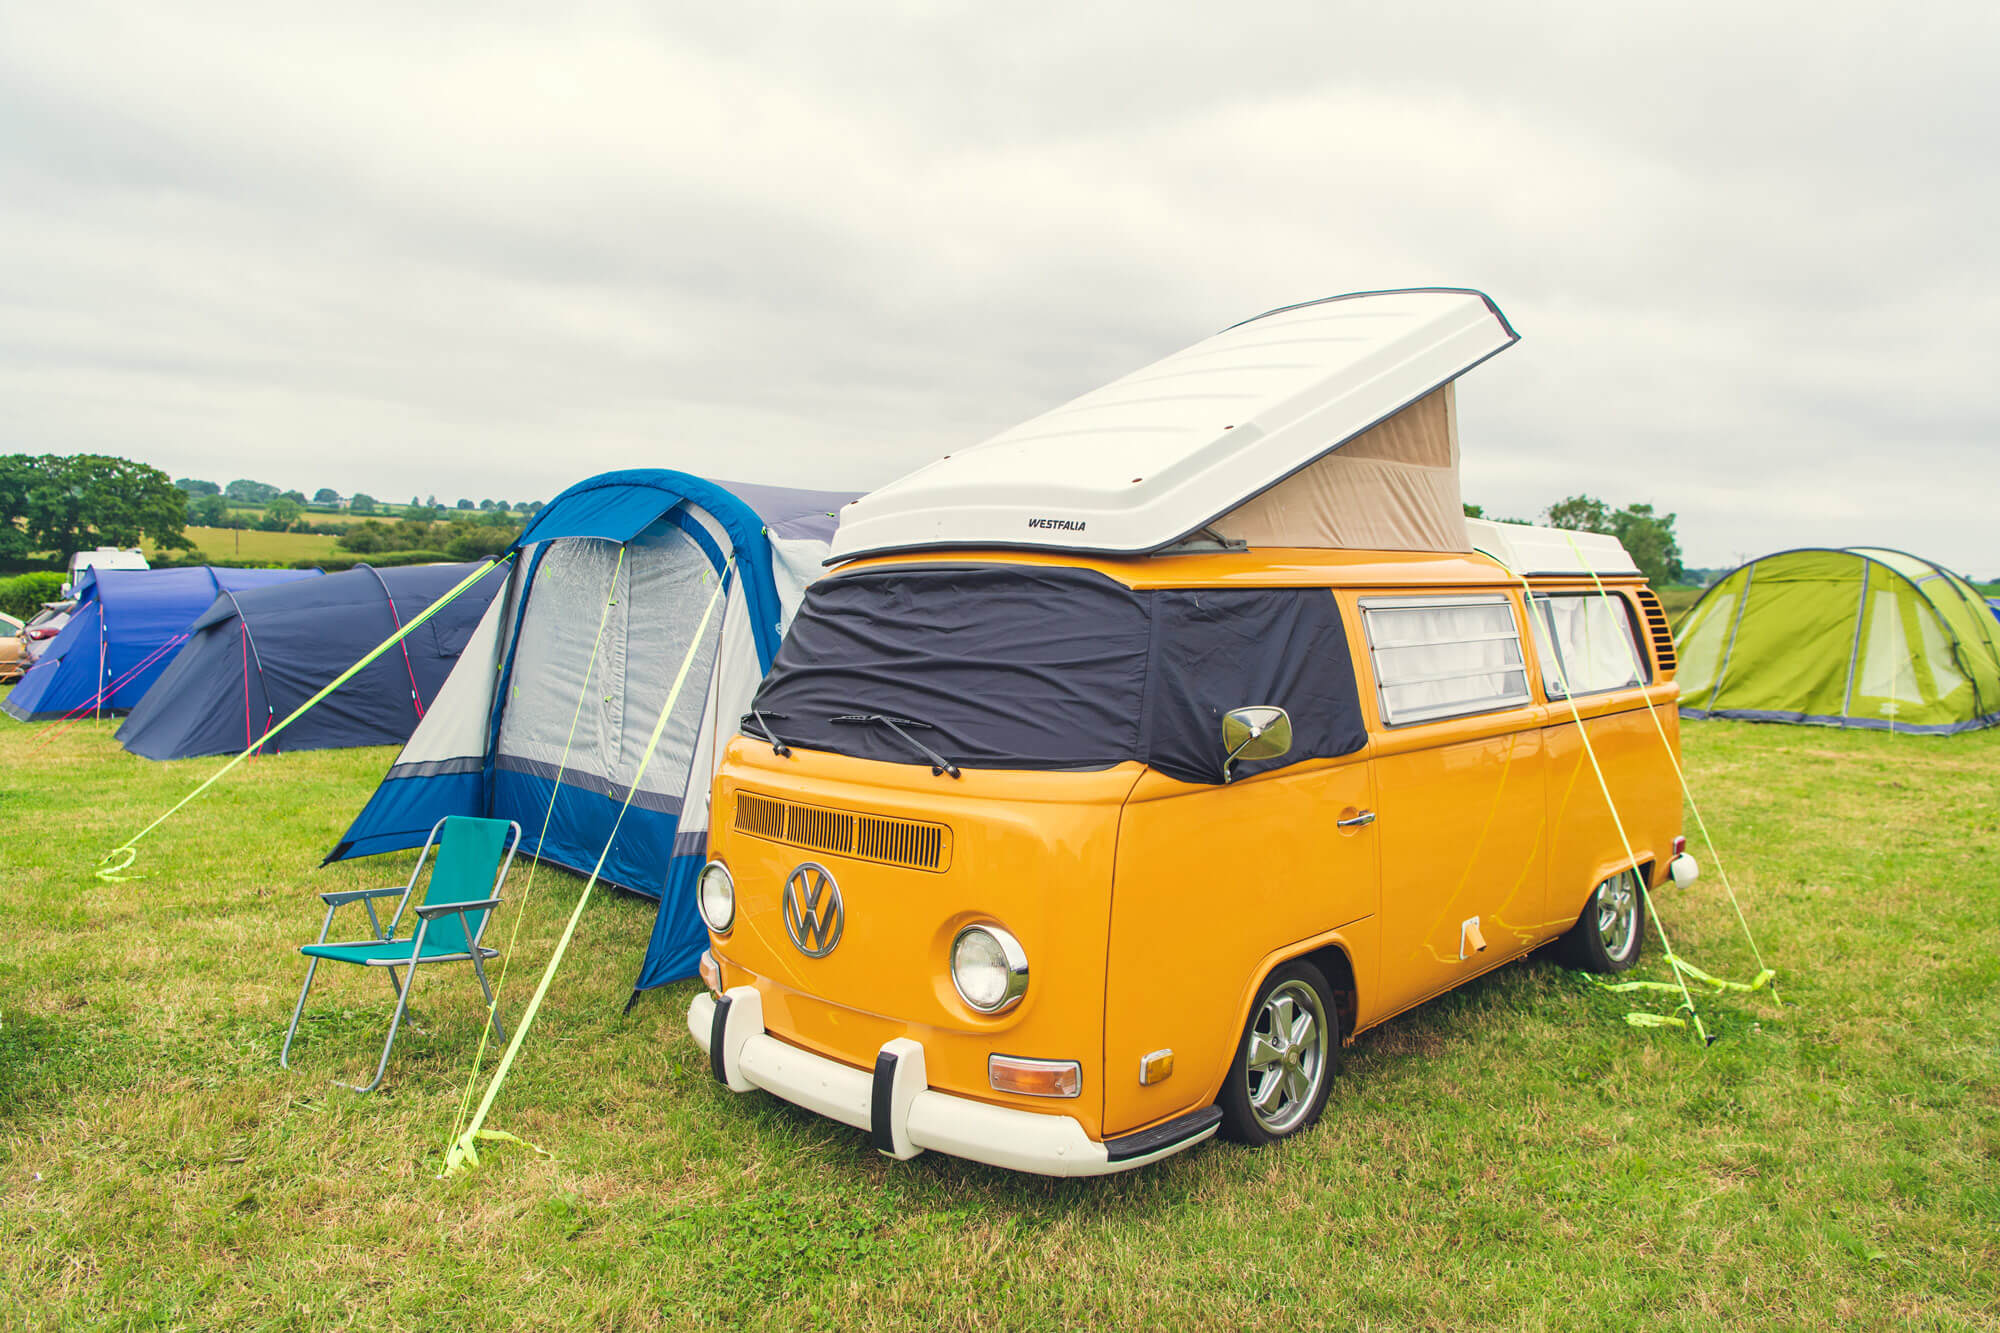 Camping at Silverstone